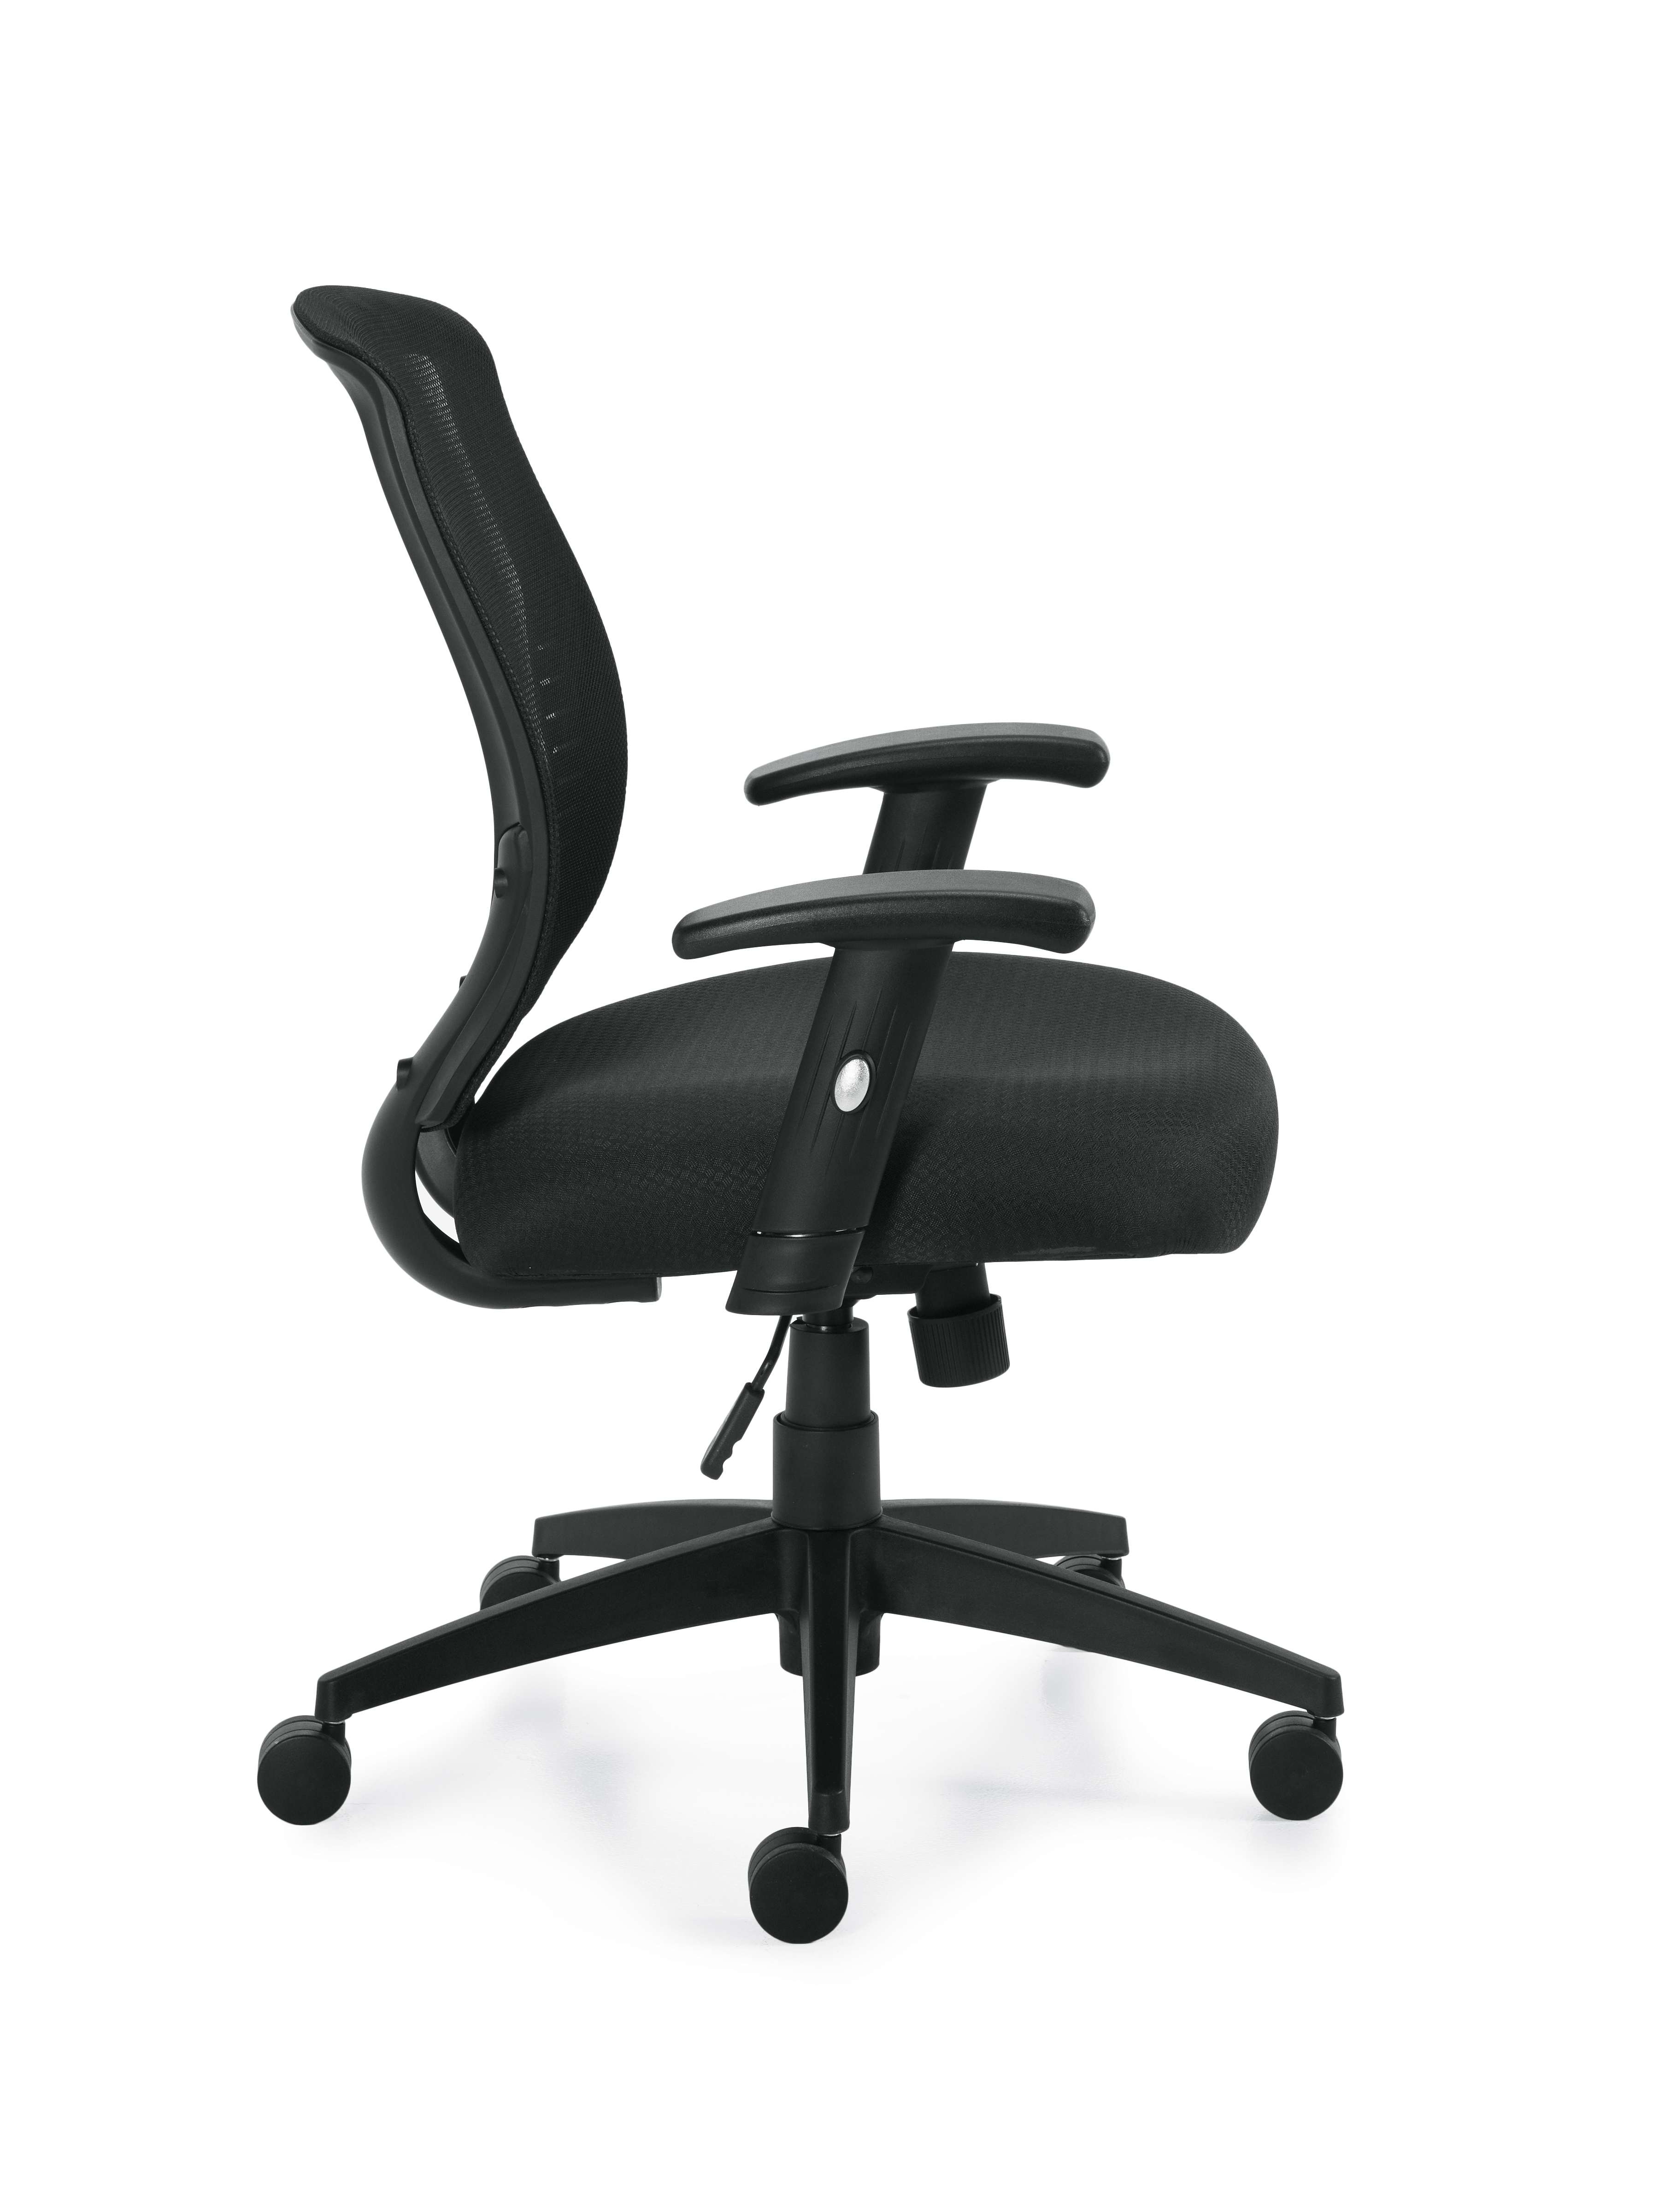 Mesh Seat Office Chair Side View 1 